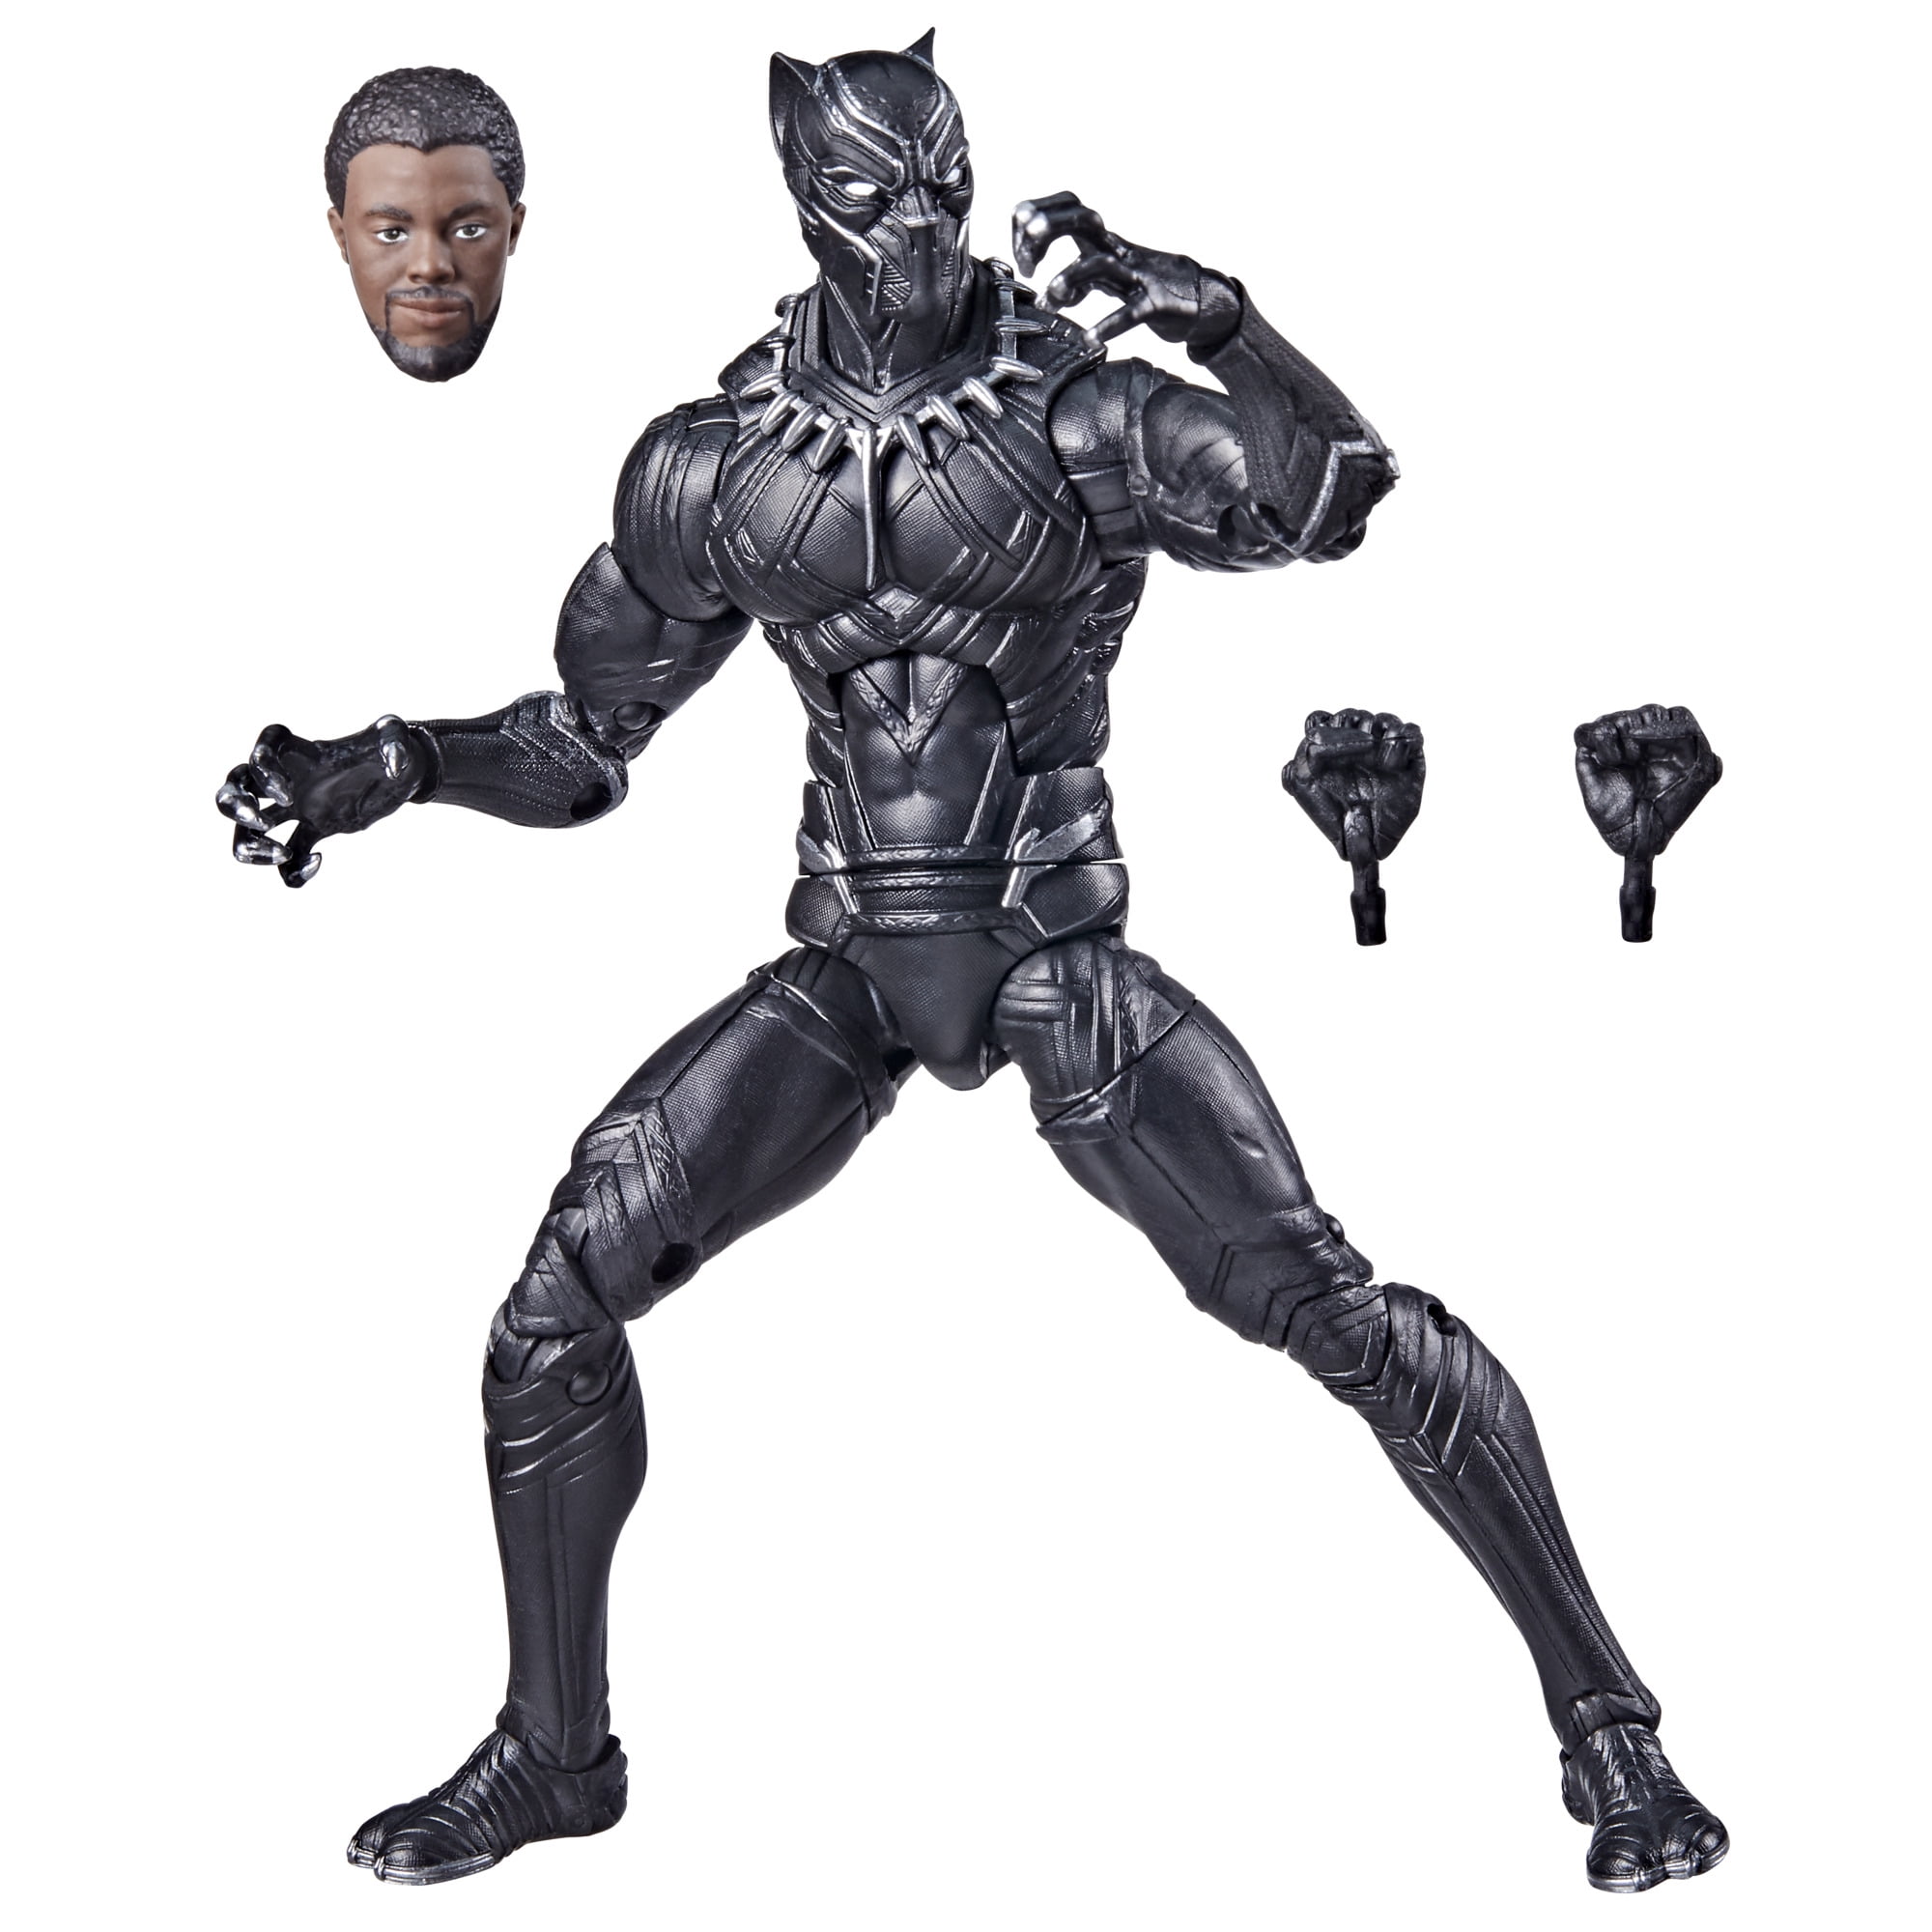 NEW 1/6 Black Panther Full Figure w/ body for 12" doll toy hot  ❶USA IN STOCK❶ 